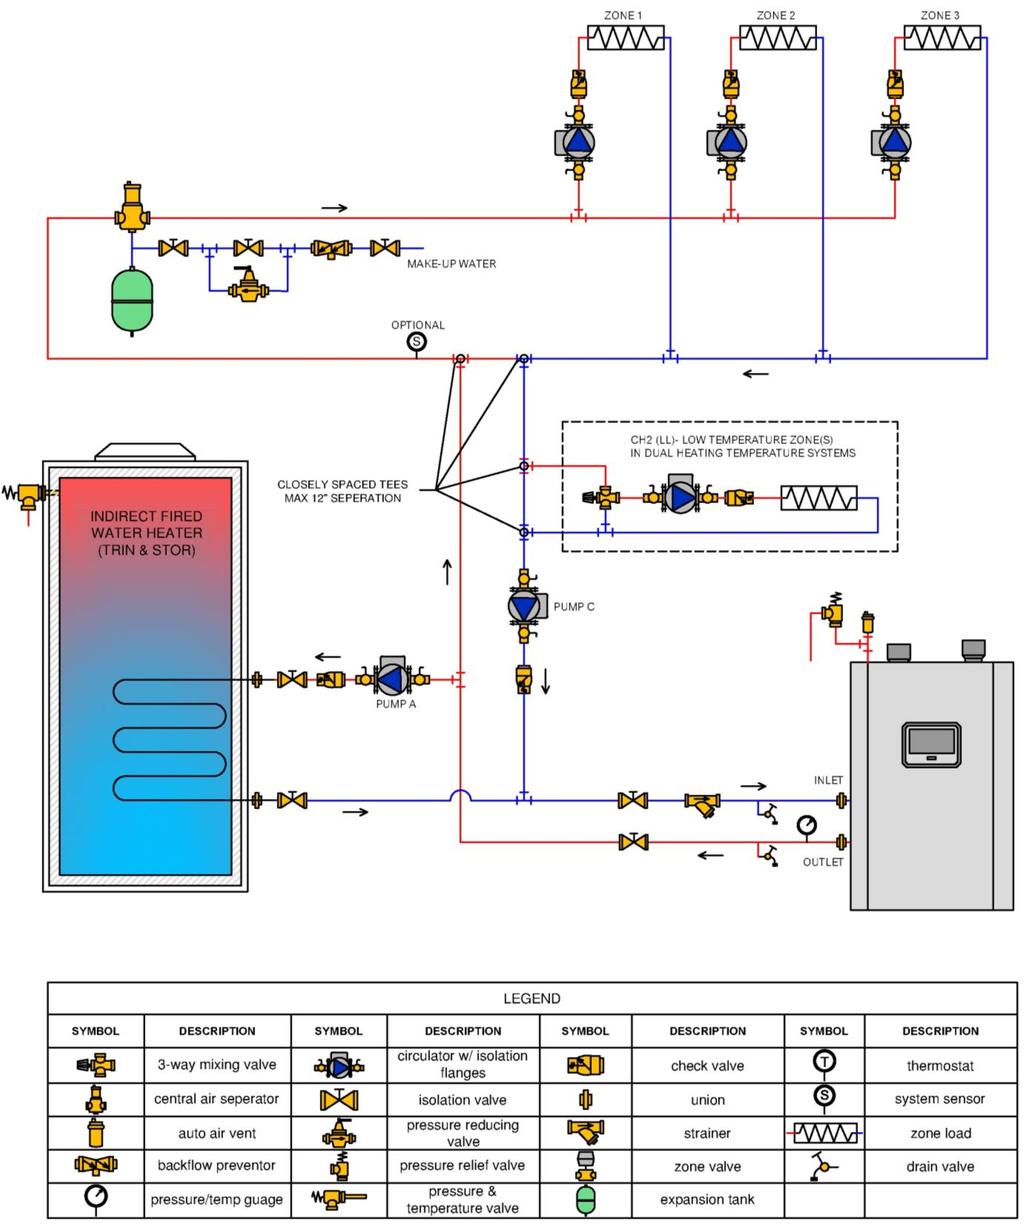 Installation and Operation Instructions Trinity Figure 10-6 Plumbing Schematic Multiple Central Heating Circulators Figure 10-6 illustrates the basic plumbing requirements for a Trinity Tft boiler